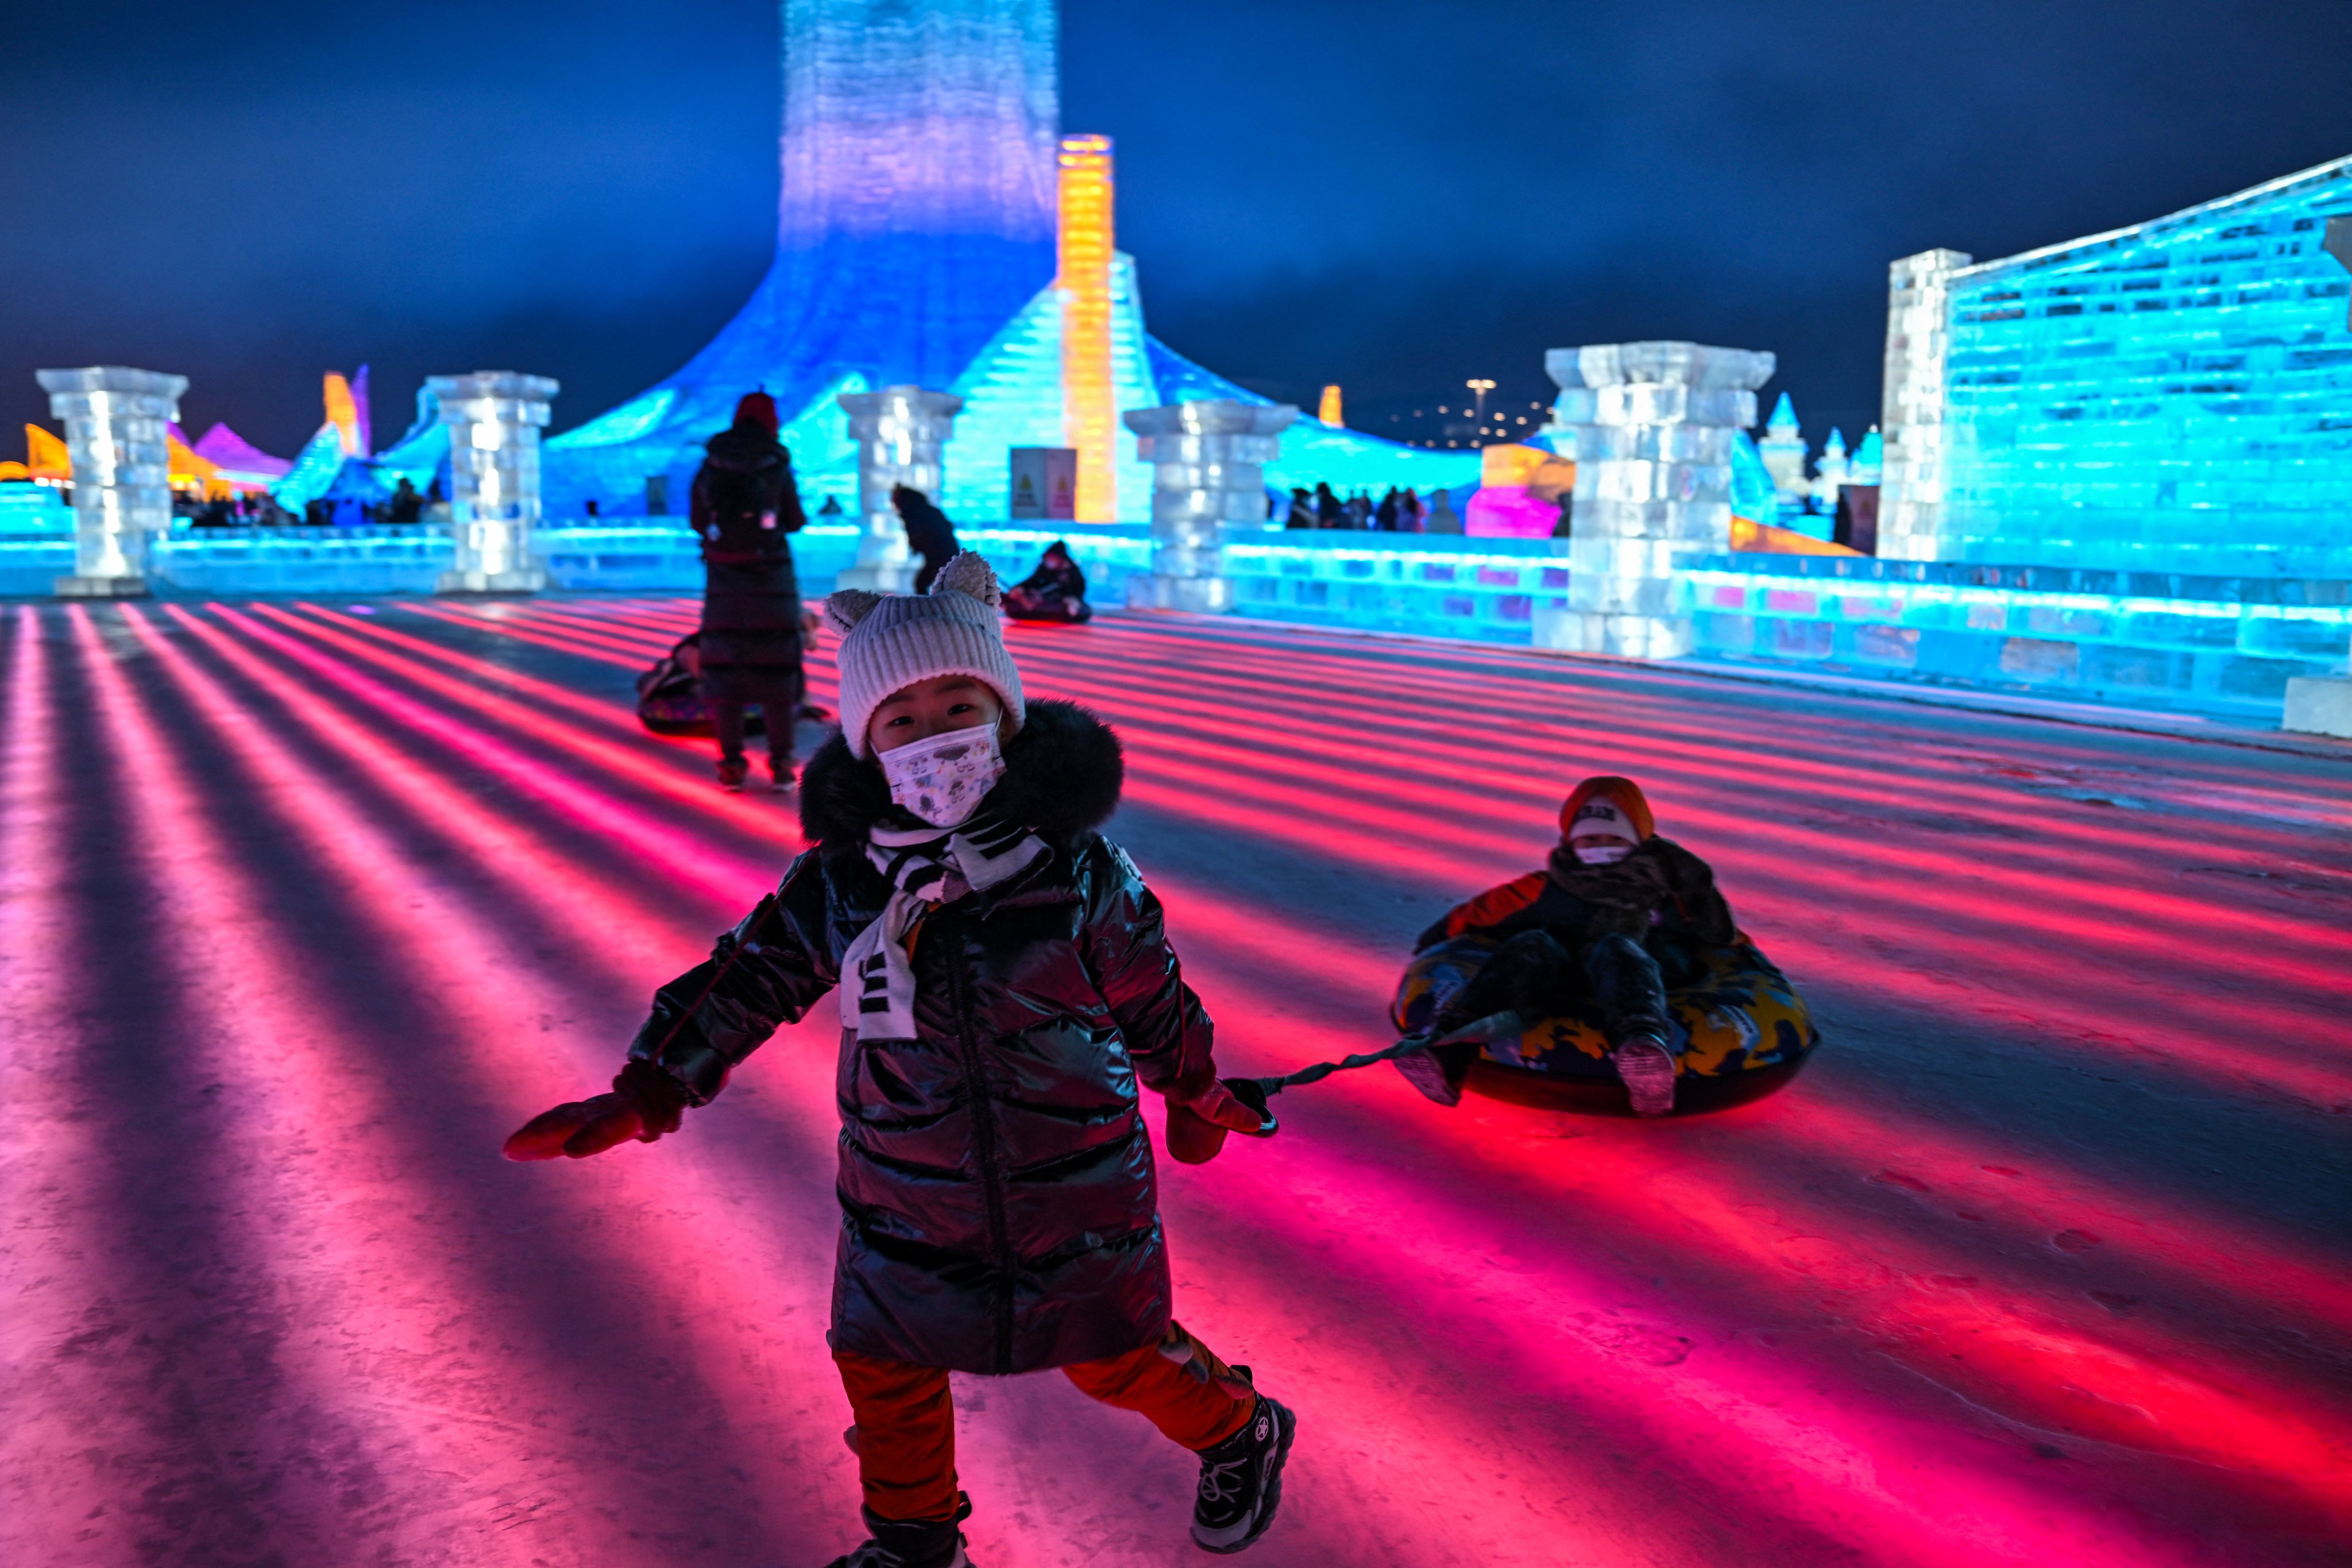 Children play at the Harbin Ice and Snow World in Harbin during the opening ceremony of the 39th Harbin China International Ice and Snow Festival on January 5, 2023. To reignite its tourist appeal, Hong Kong could take lessons from the mainland Chinese city. Photo: AFP